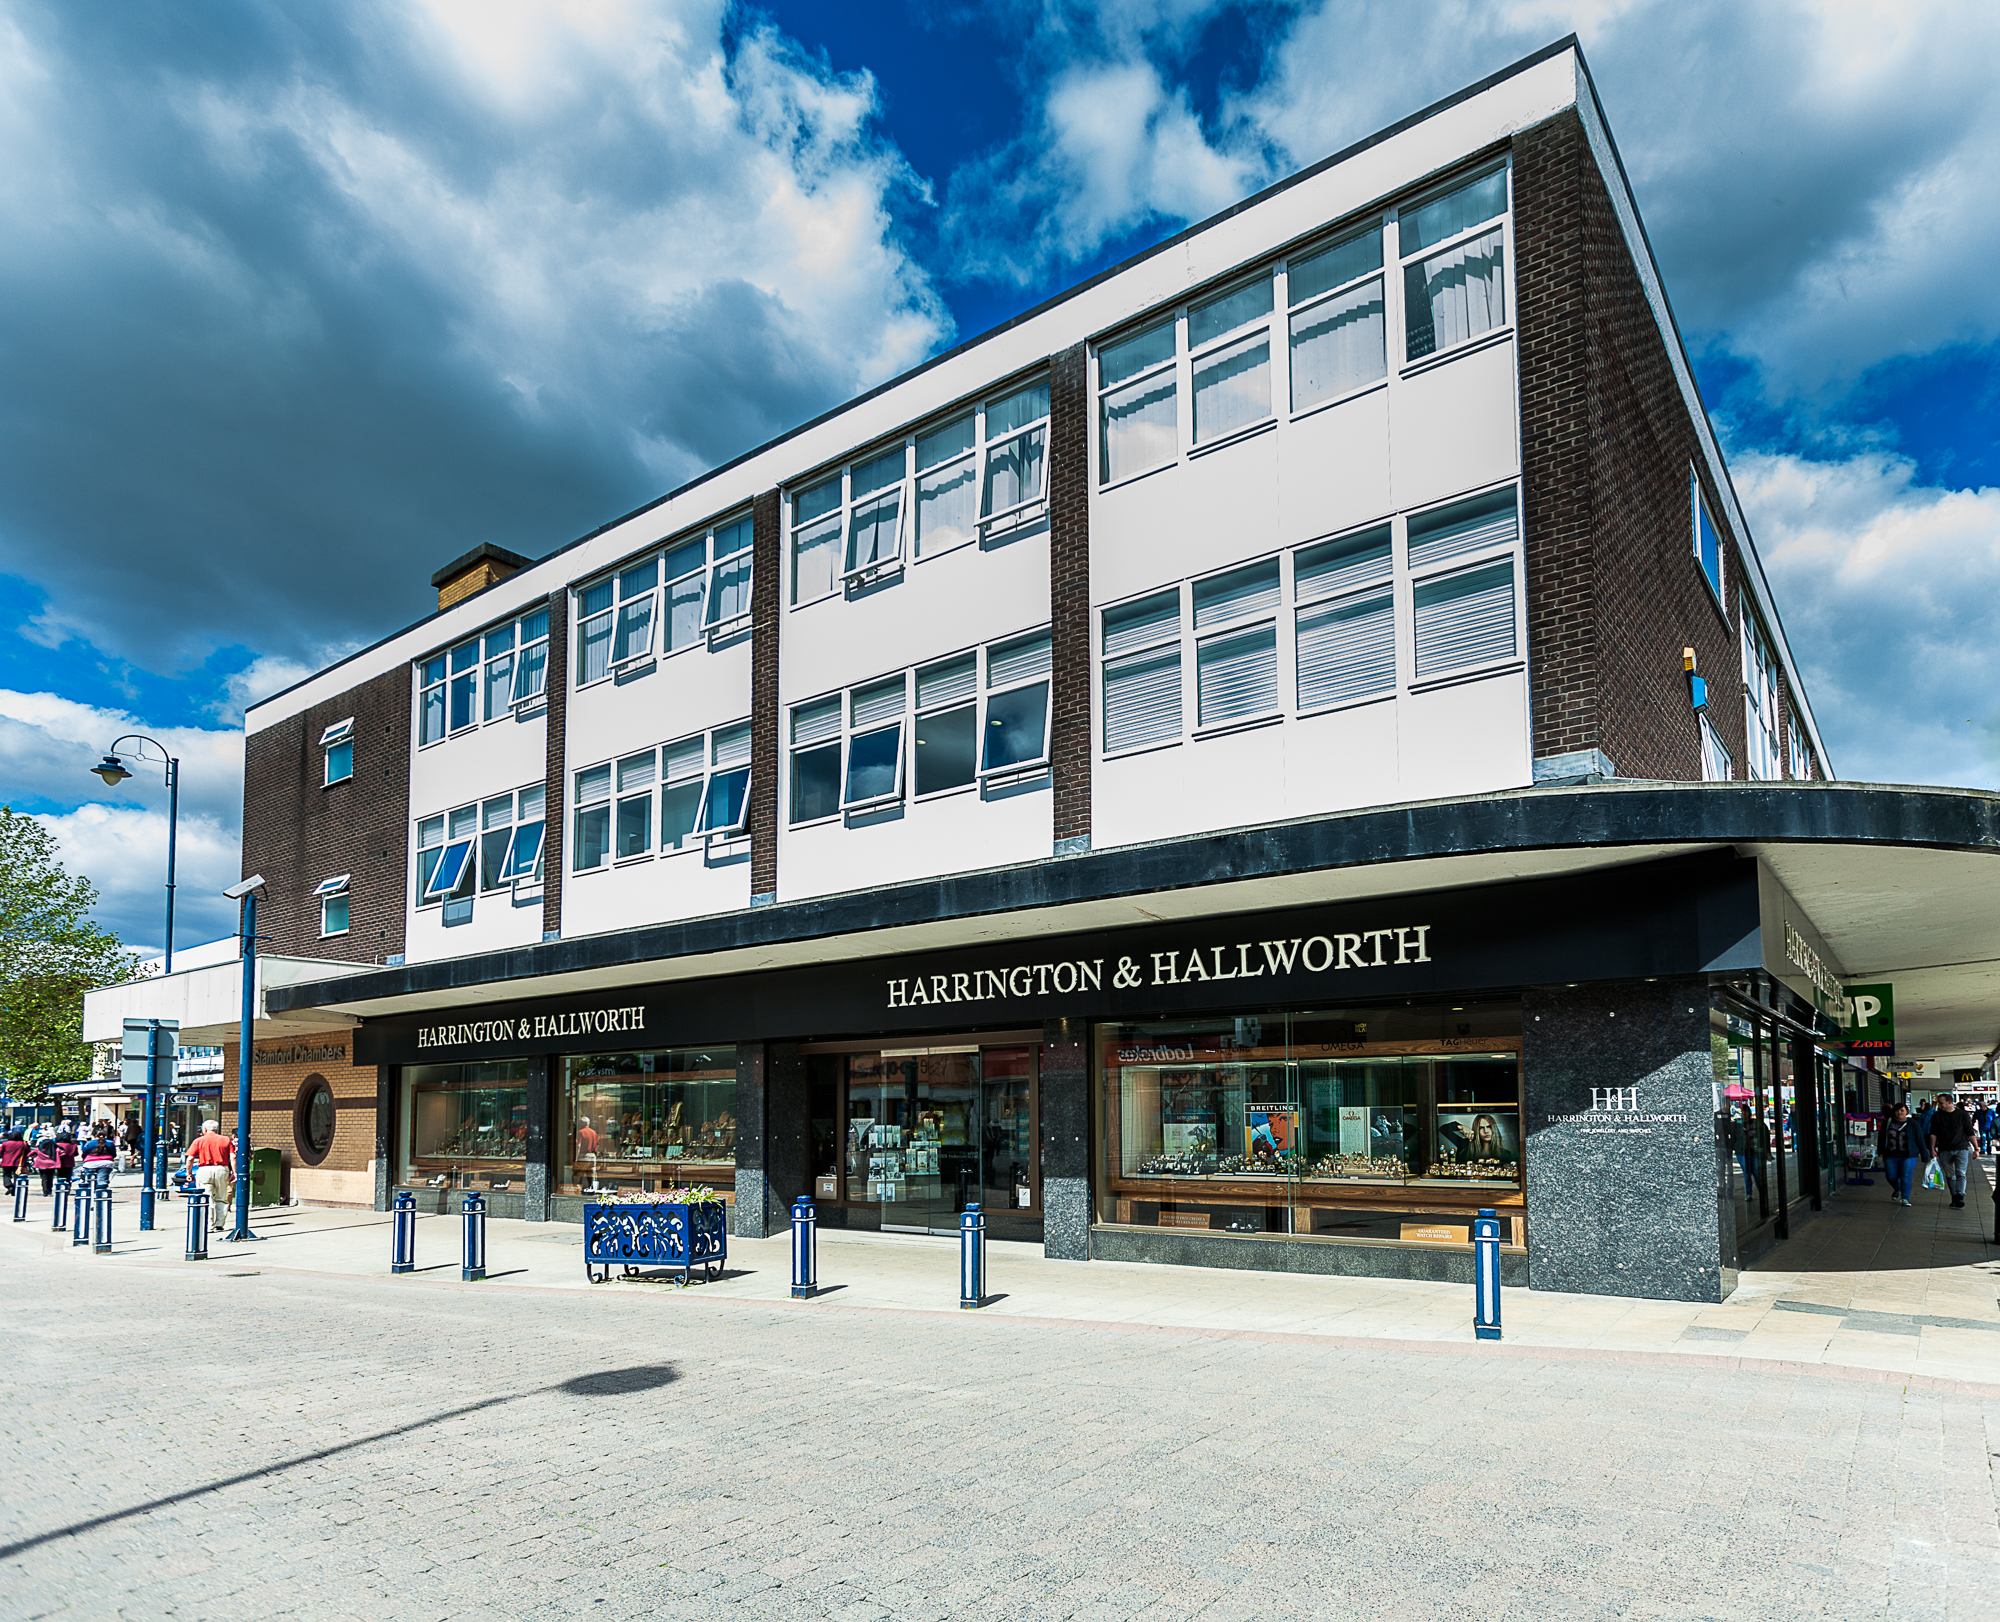 Harrington & hallworth's first store was previously a furniture showroom, which gives you an idea about the size of the shop.